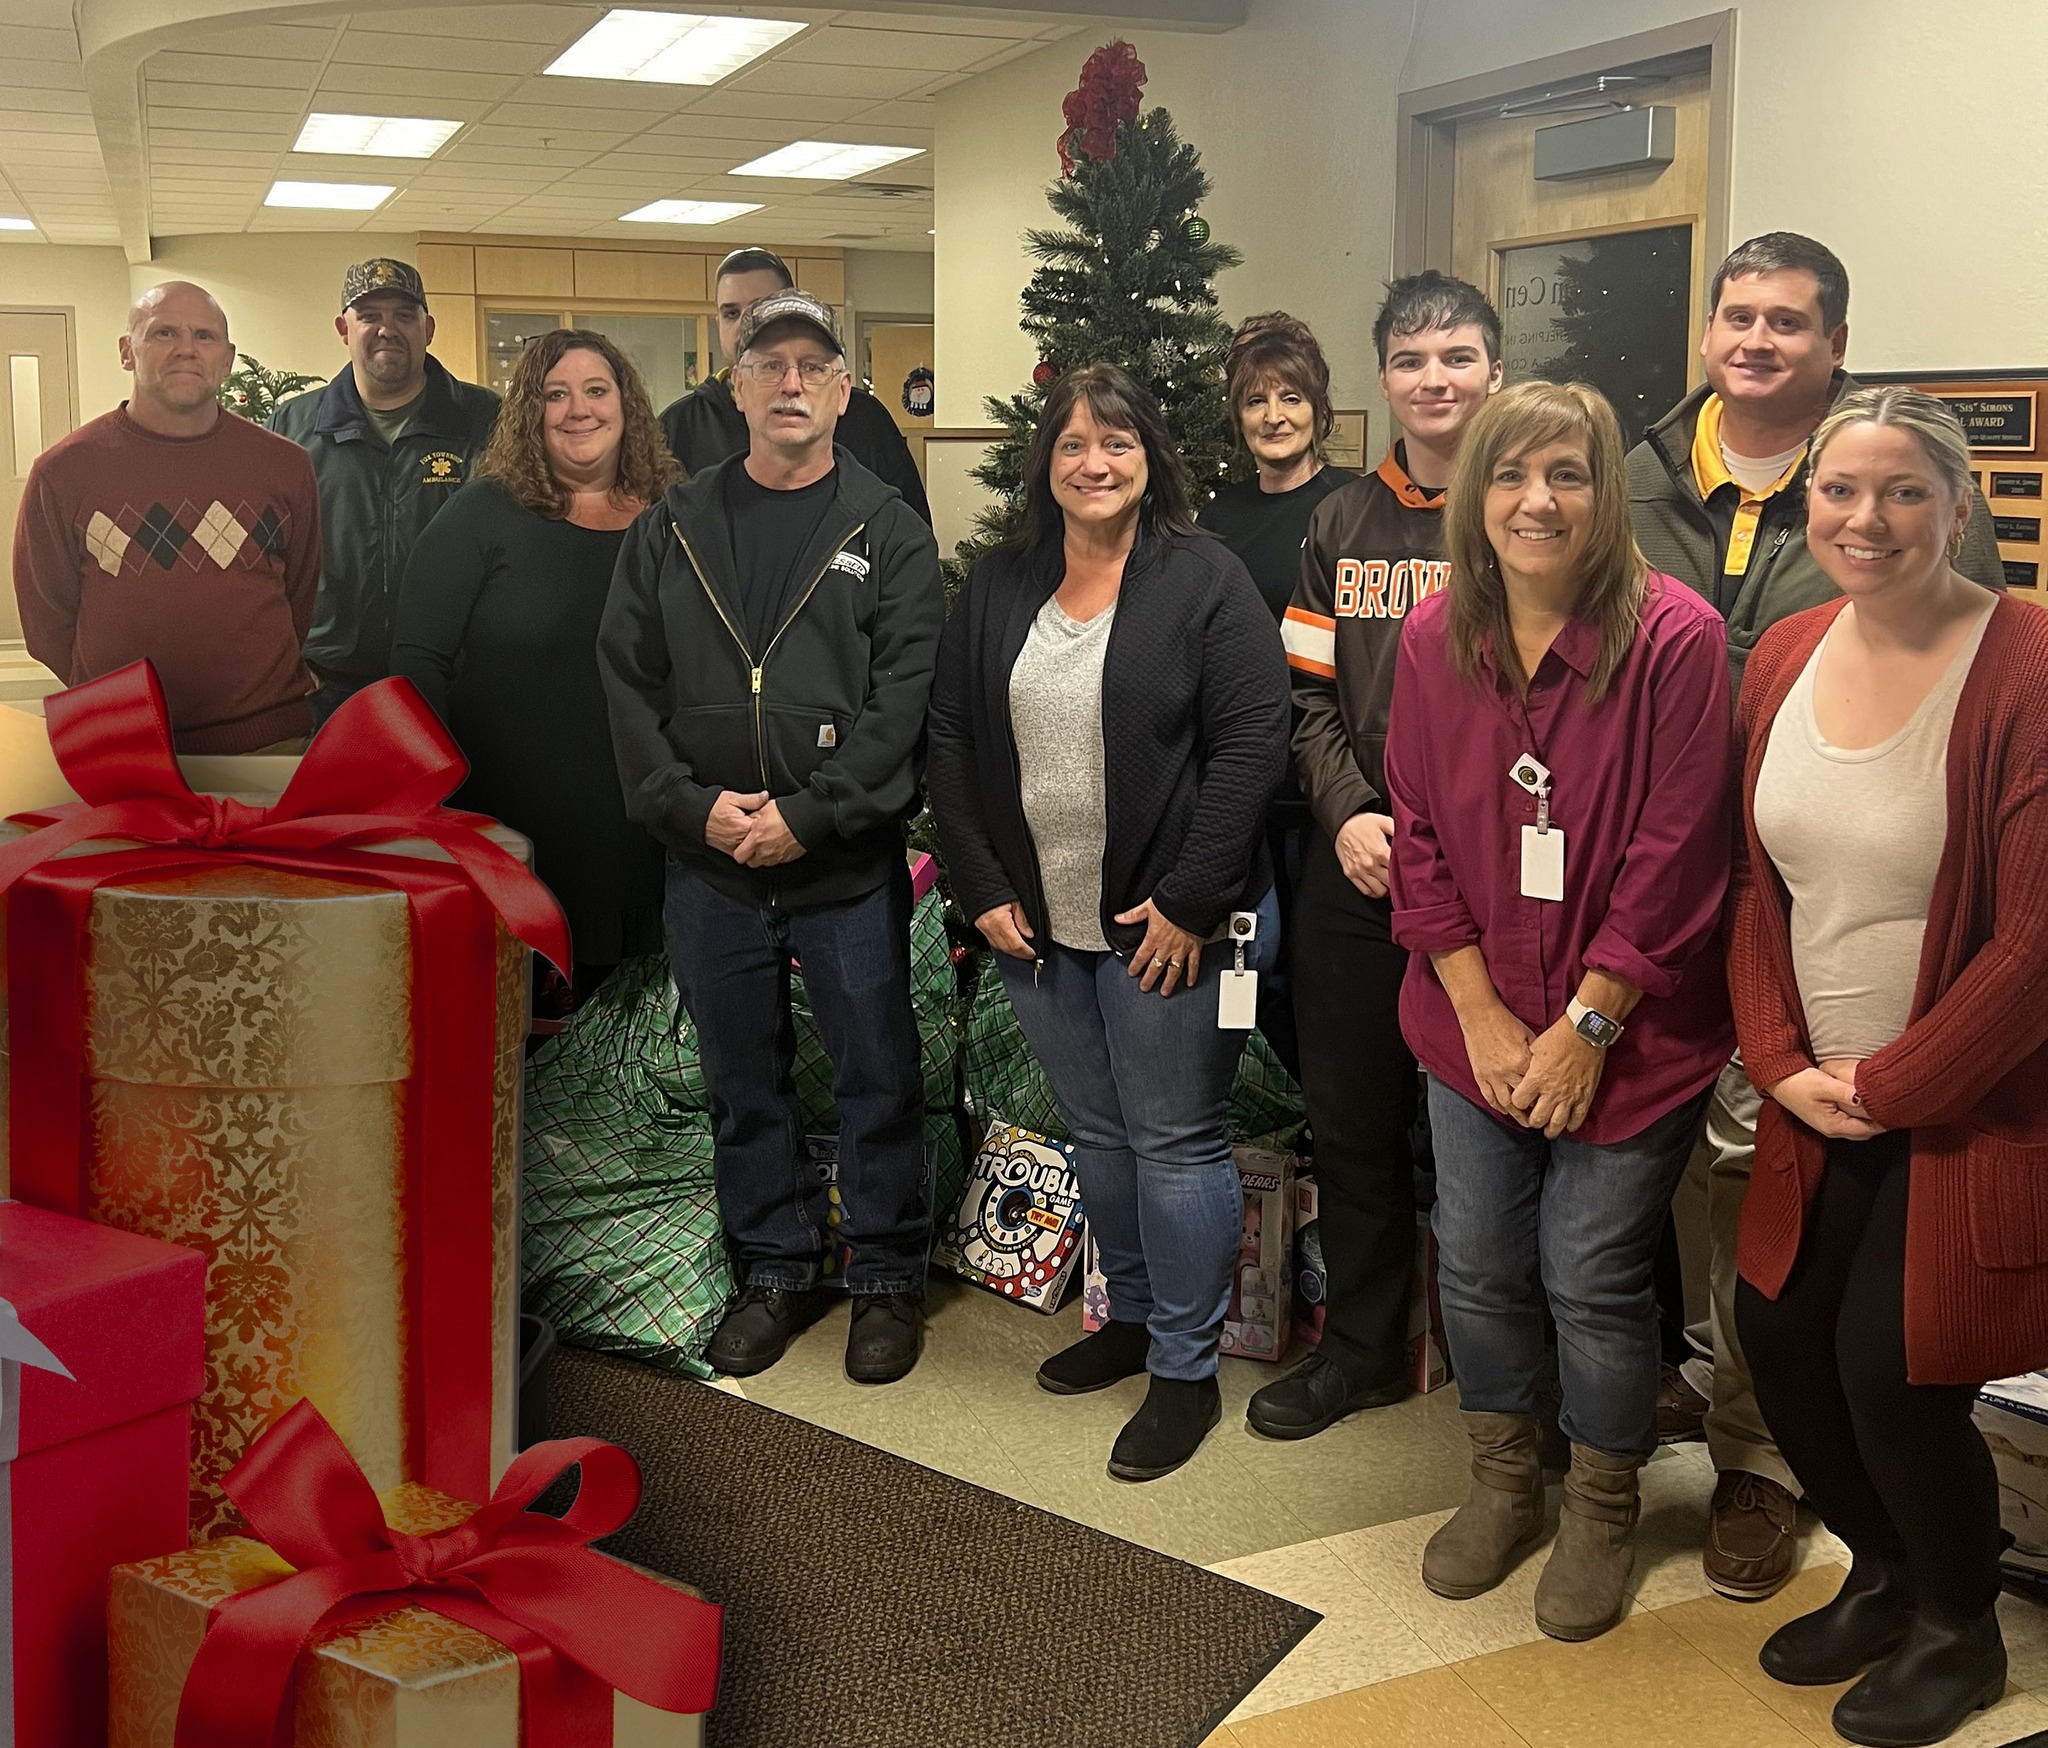 Morgan and DCI employees pictured with donated gifts